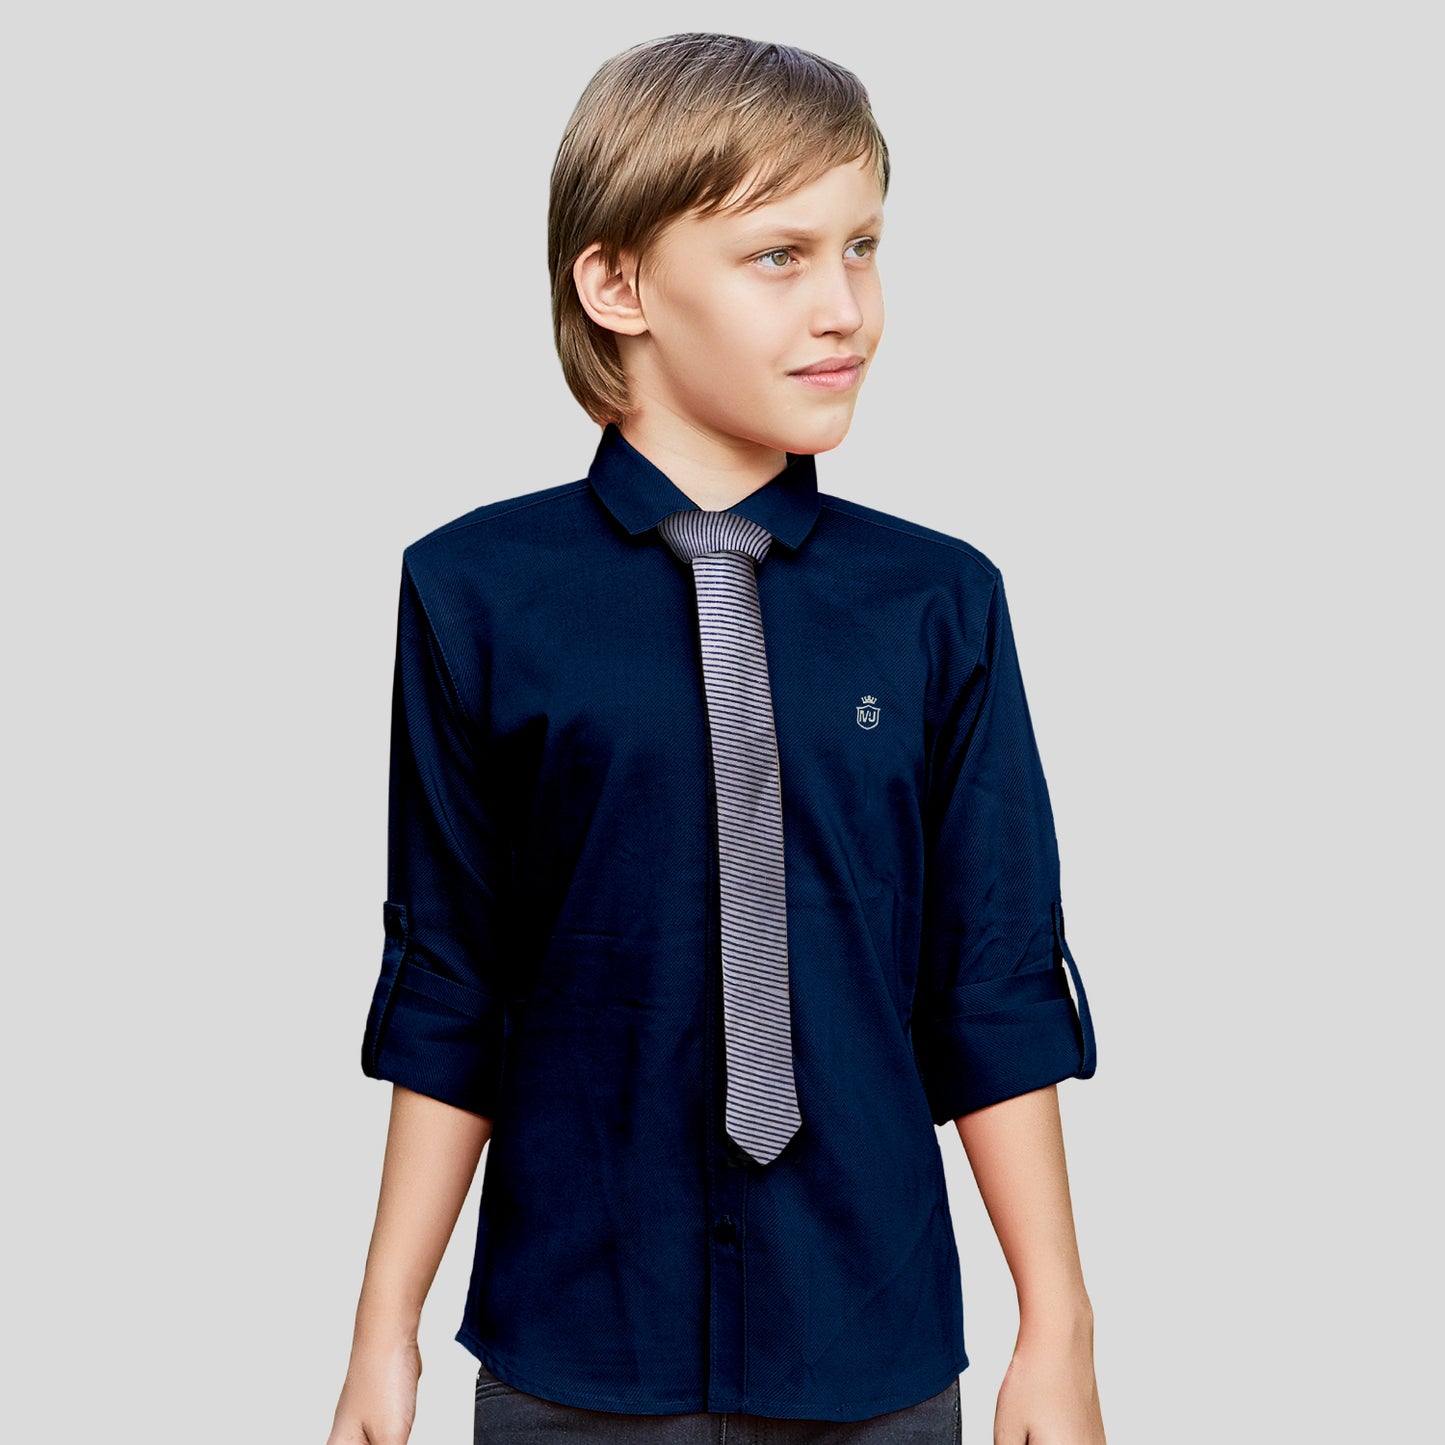 Tied to Perfection: Shirt + Tie Combo for Party Elegance!